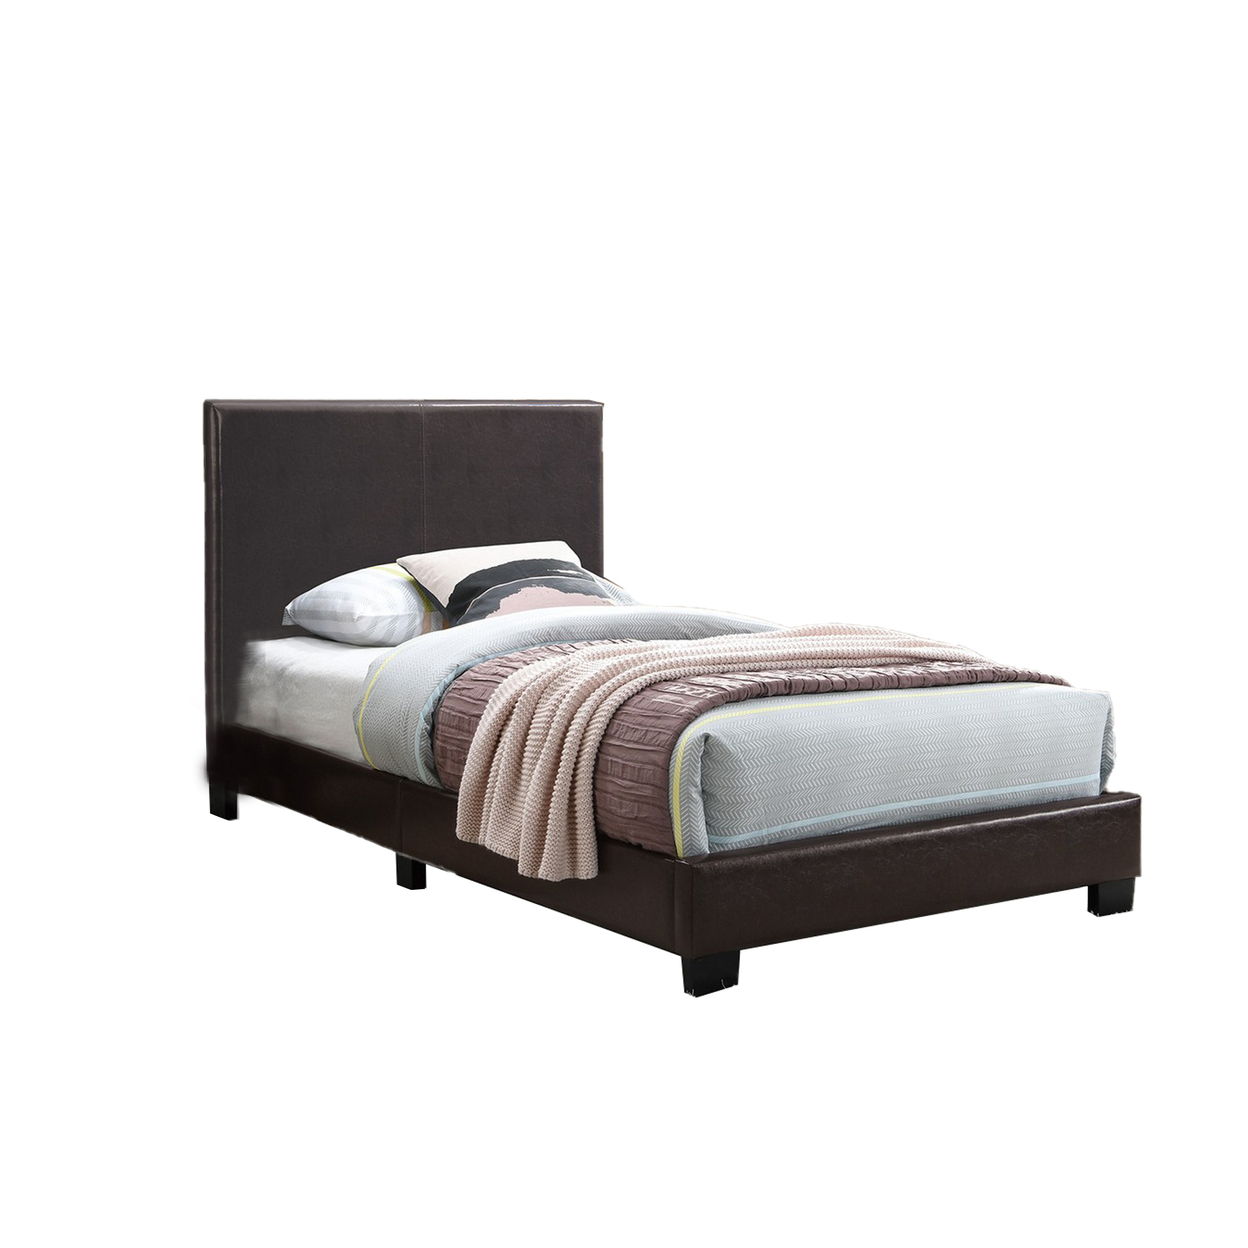 Transitional Style Leatherette Full Bed With Padded Headboard, Dark Brown- Saltoro Sherpi